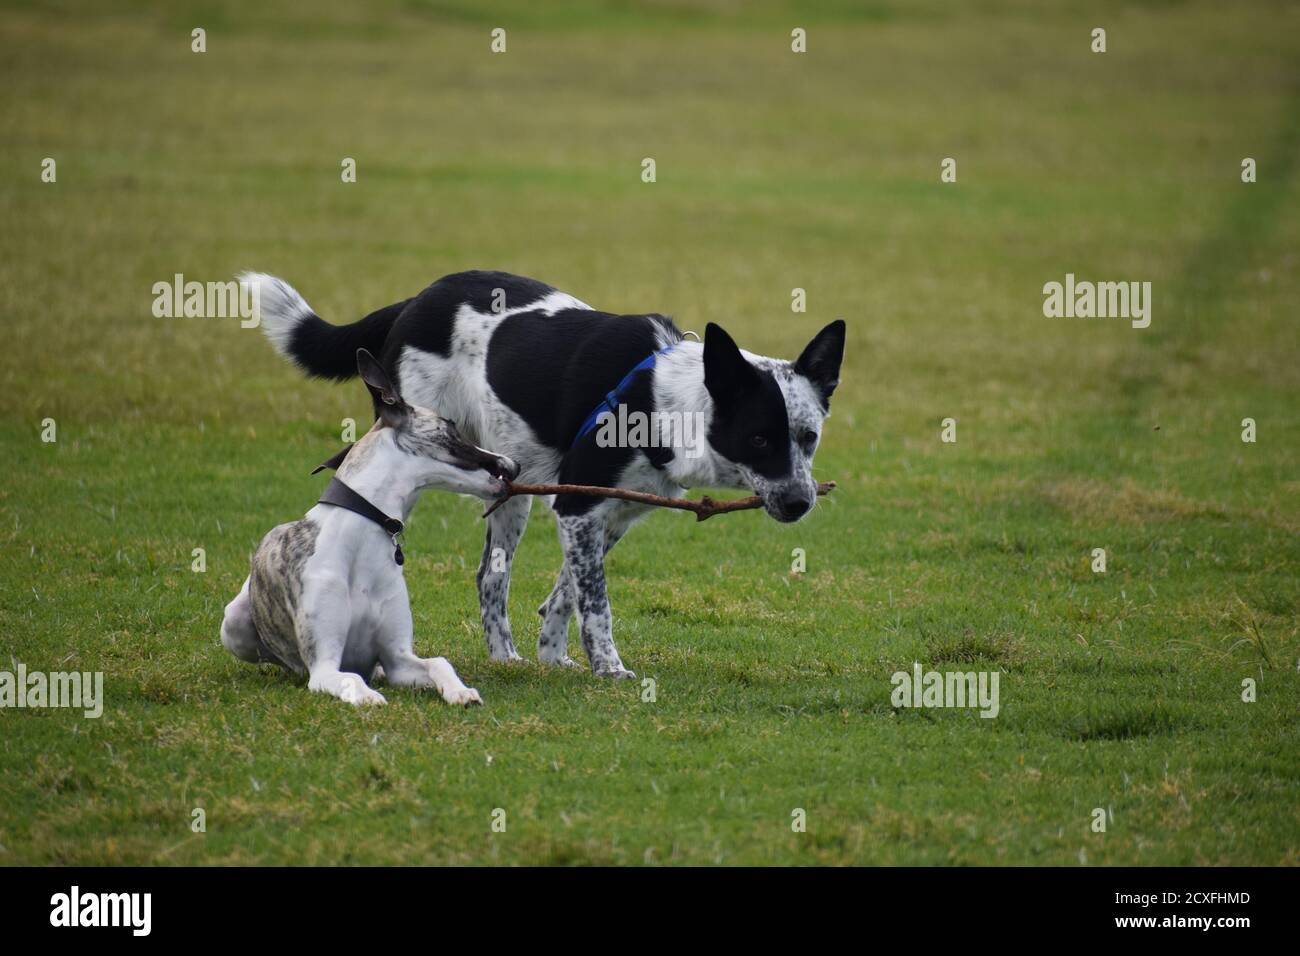 Dogs in Park Stock Photo